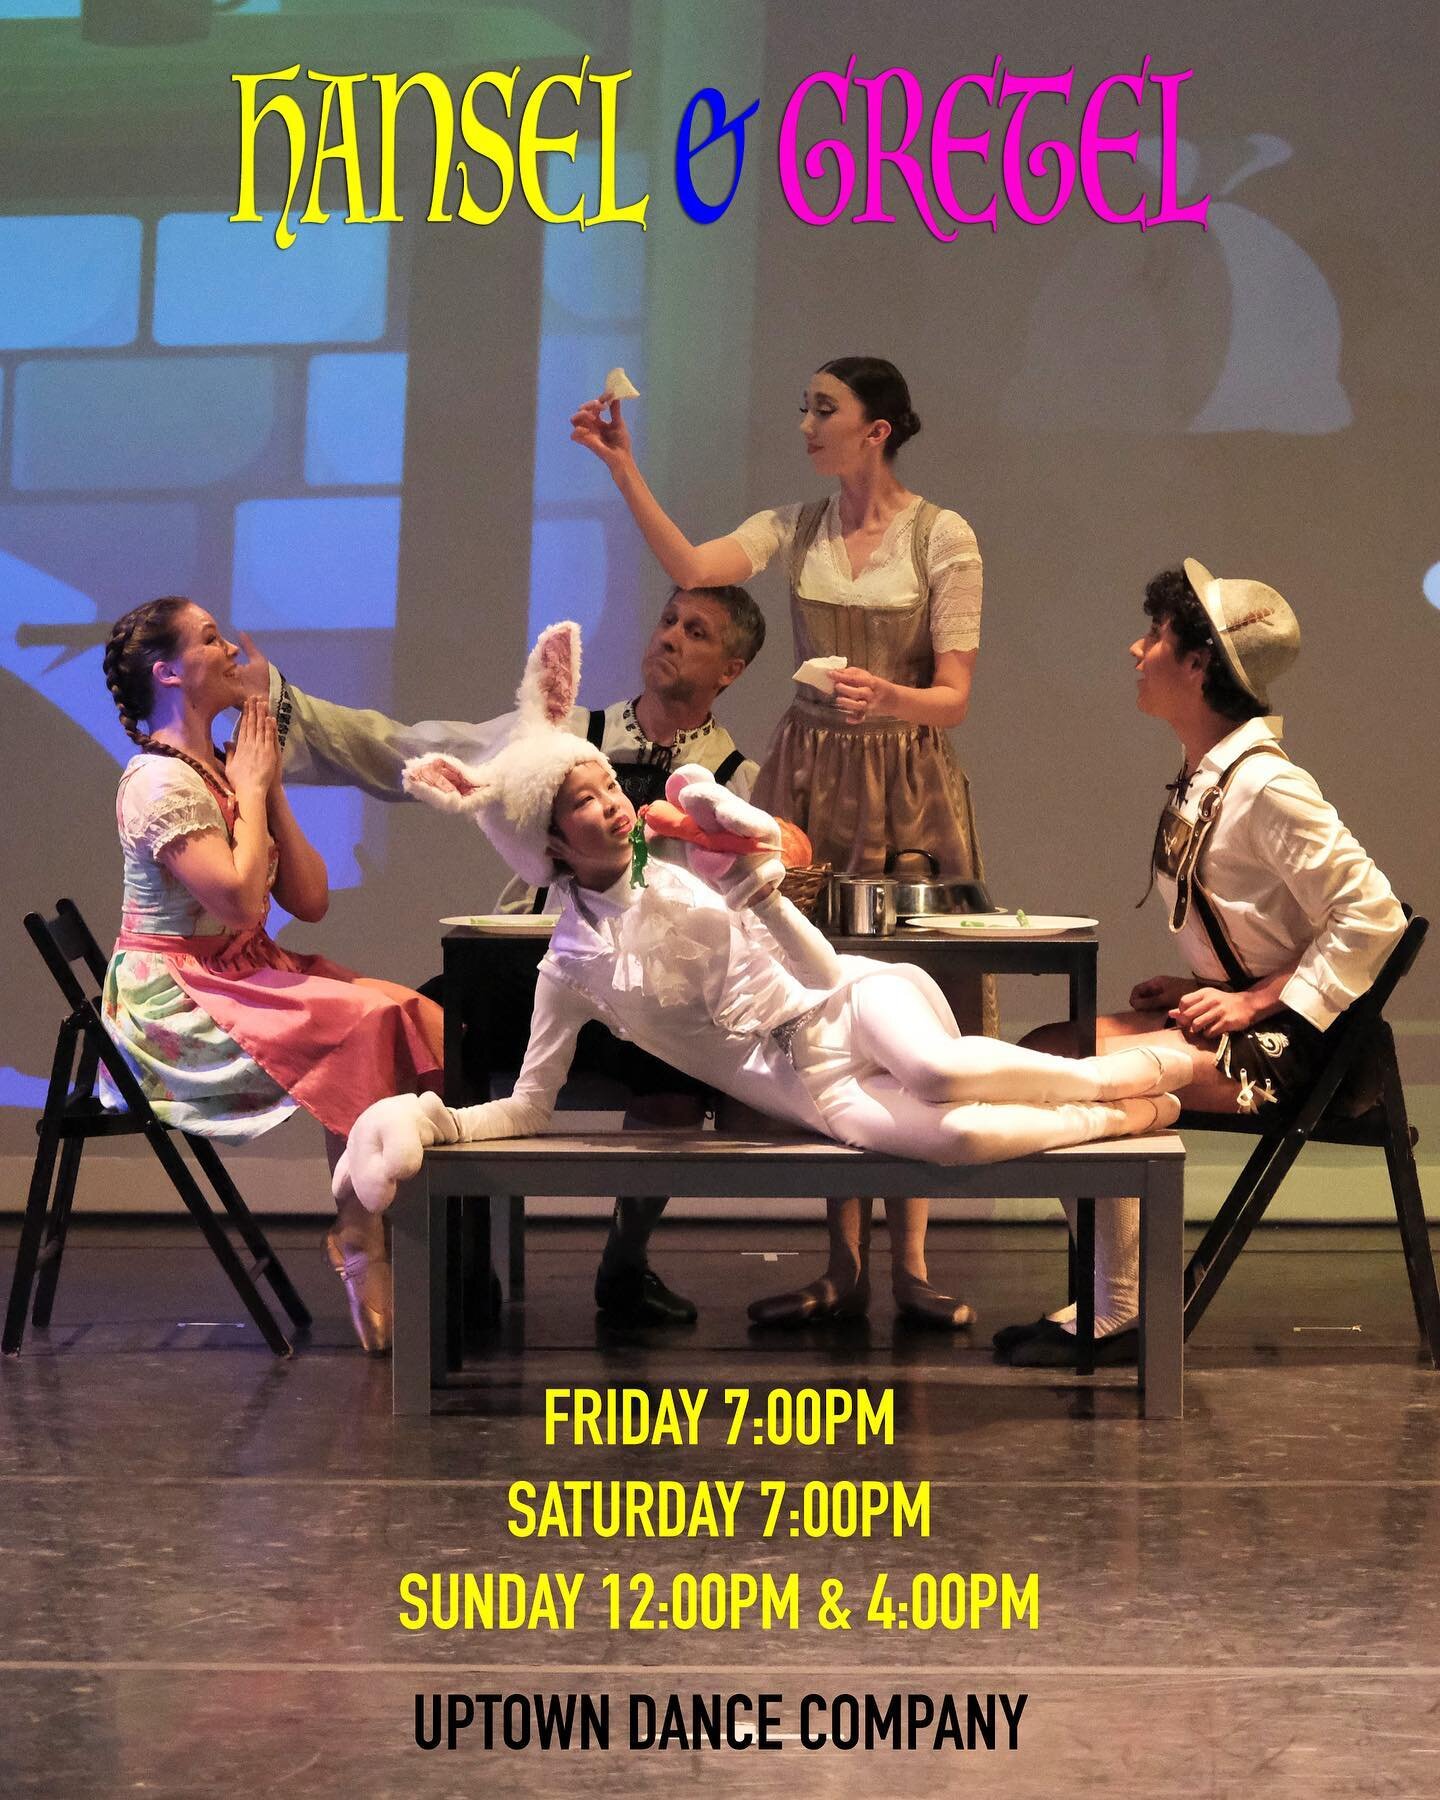 Don&rsquo;t miss this weekend &ldquo;Hansel &amp; Gretel&rdquo; the fairy tale about two kids who get lost in the forest and encounter a witch 🧙&zwj;♀️✨
Get your tickets at www.uptowndance.org 

#hanselandgretel #houstontx #springbrachtexas #dancers